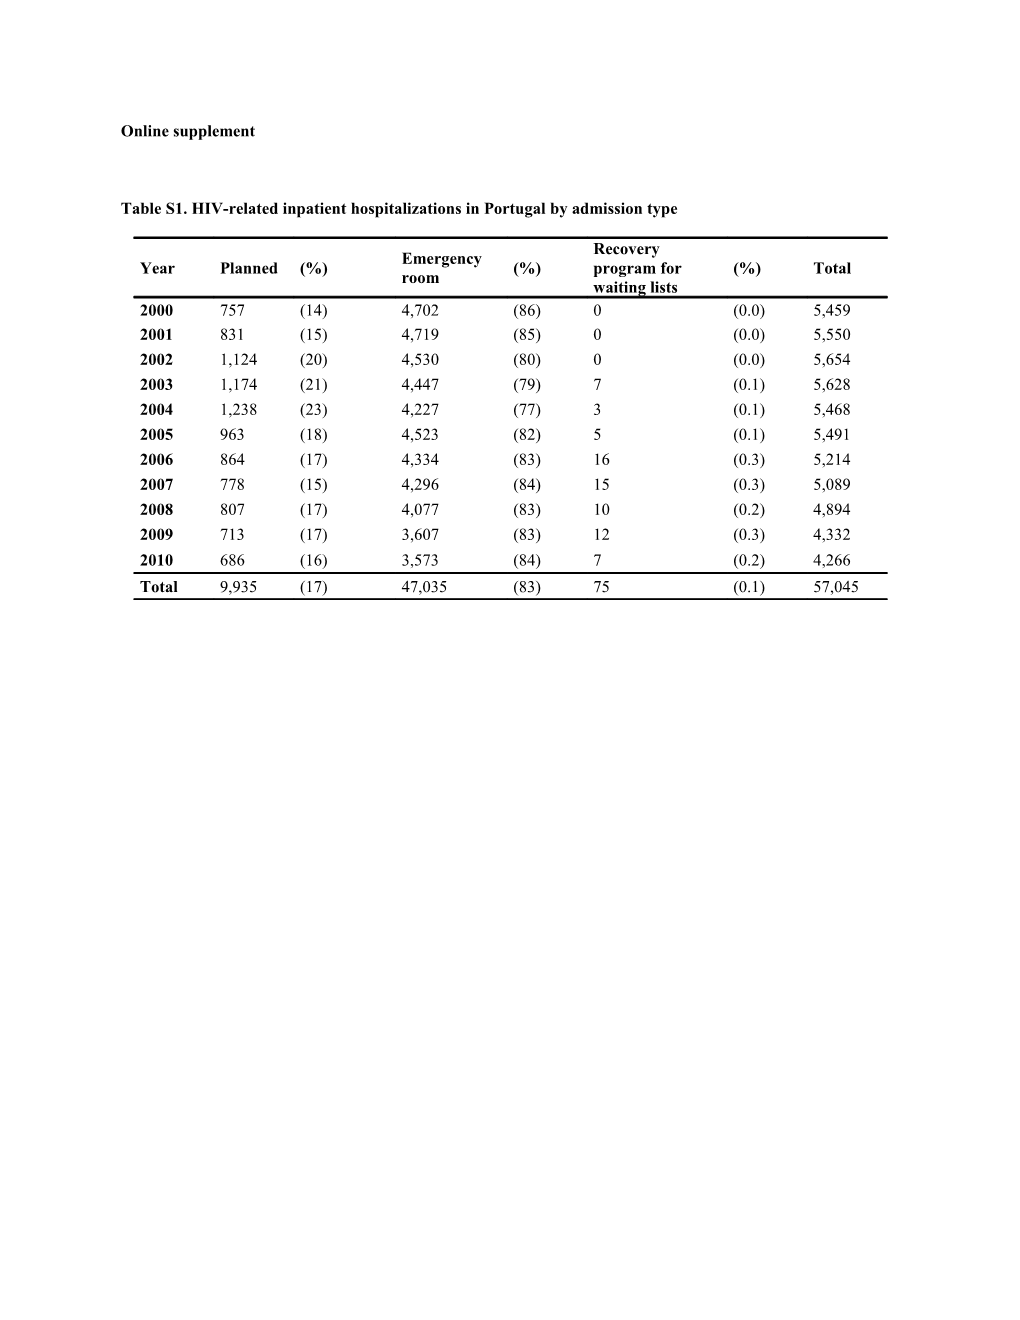 Table S1. HIV-Related Inpatient Hospitalizations in Portugal by Admission Type